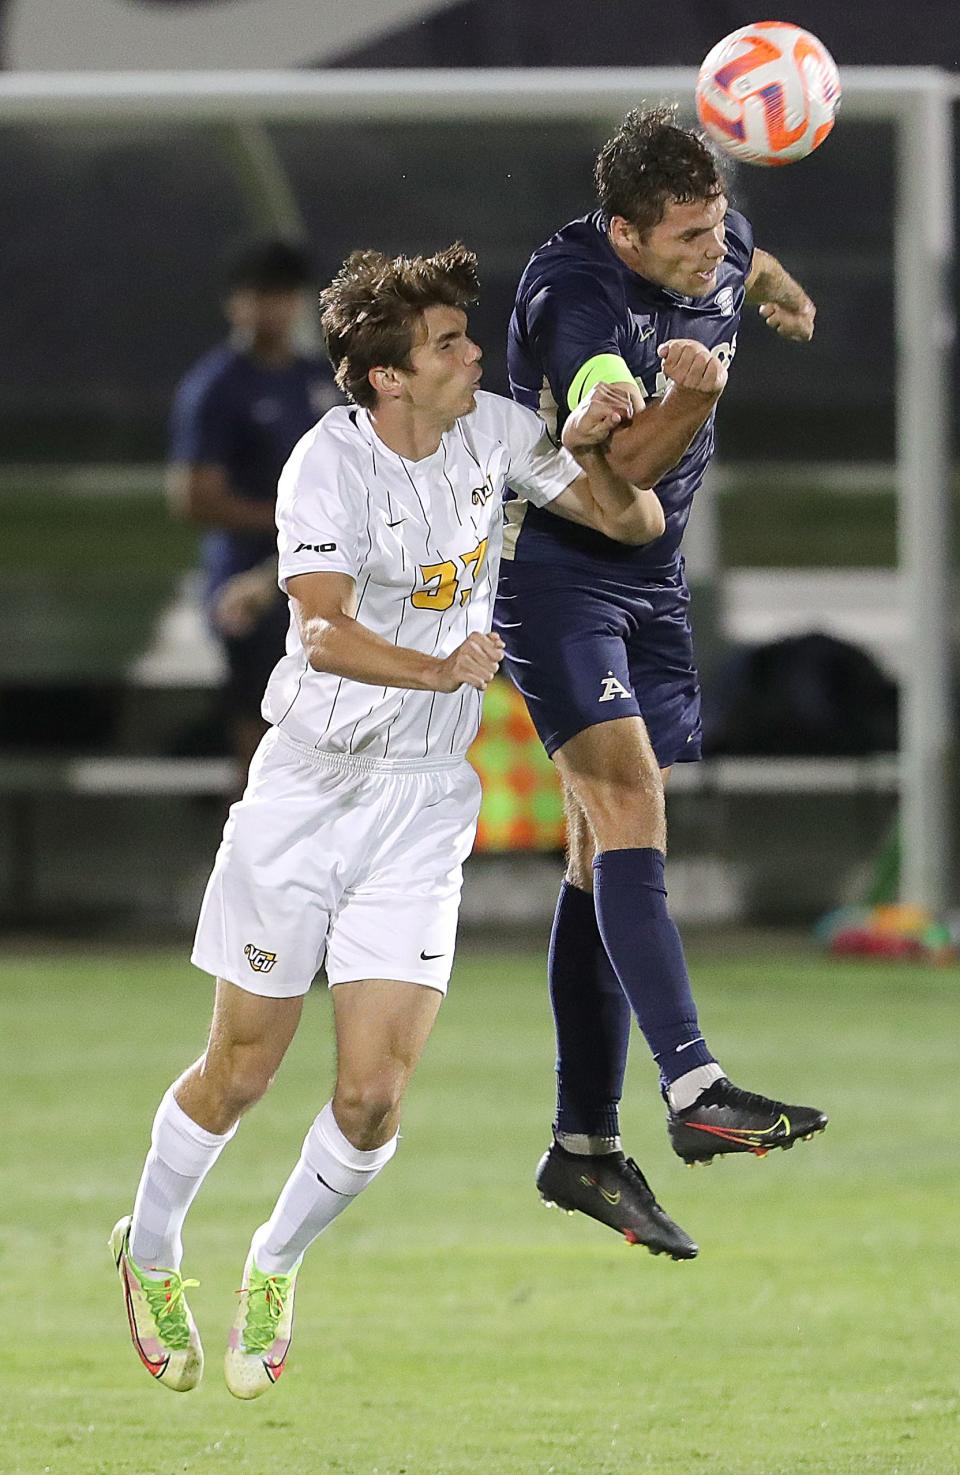 VCU's Nolan Coetzee, left, and University of Akron's Will Jackson go up after a head ball on Monday, Aug. 29, 2022 in Akron, Ohio, at FirstEnergy Stadium.